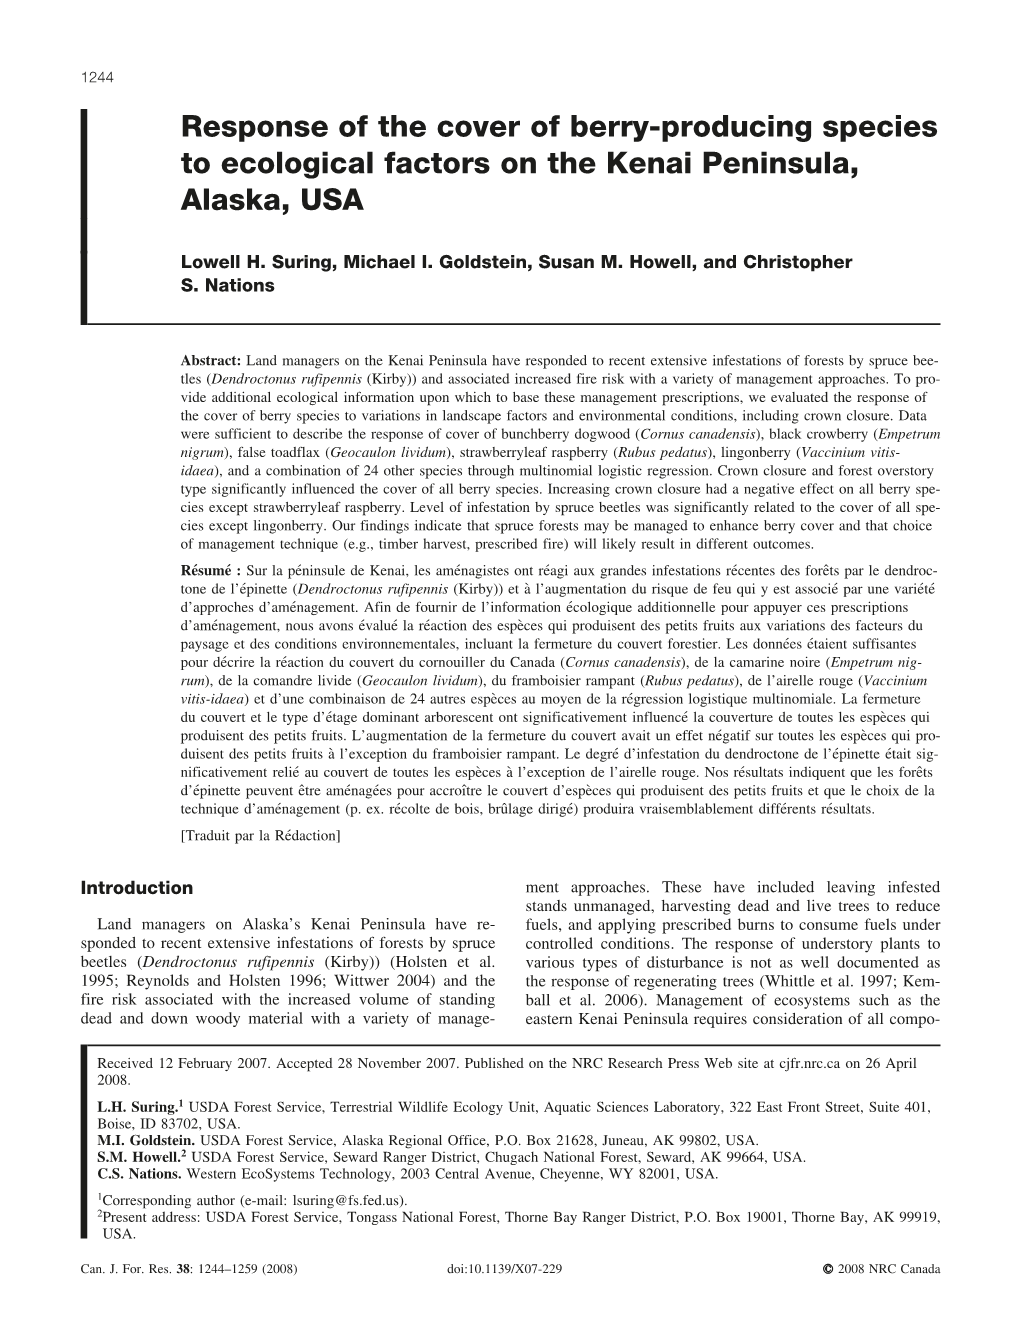 Response of the Cover of Berry-Producing Species to Ecological Factors on the Kenai Peninsula, Alaska, USA